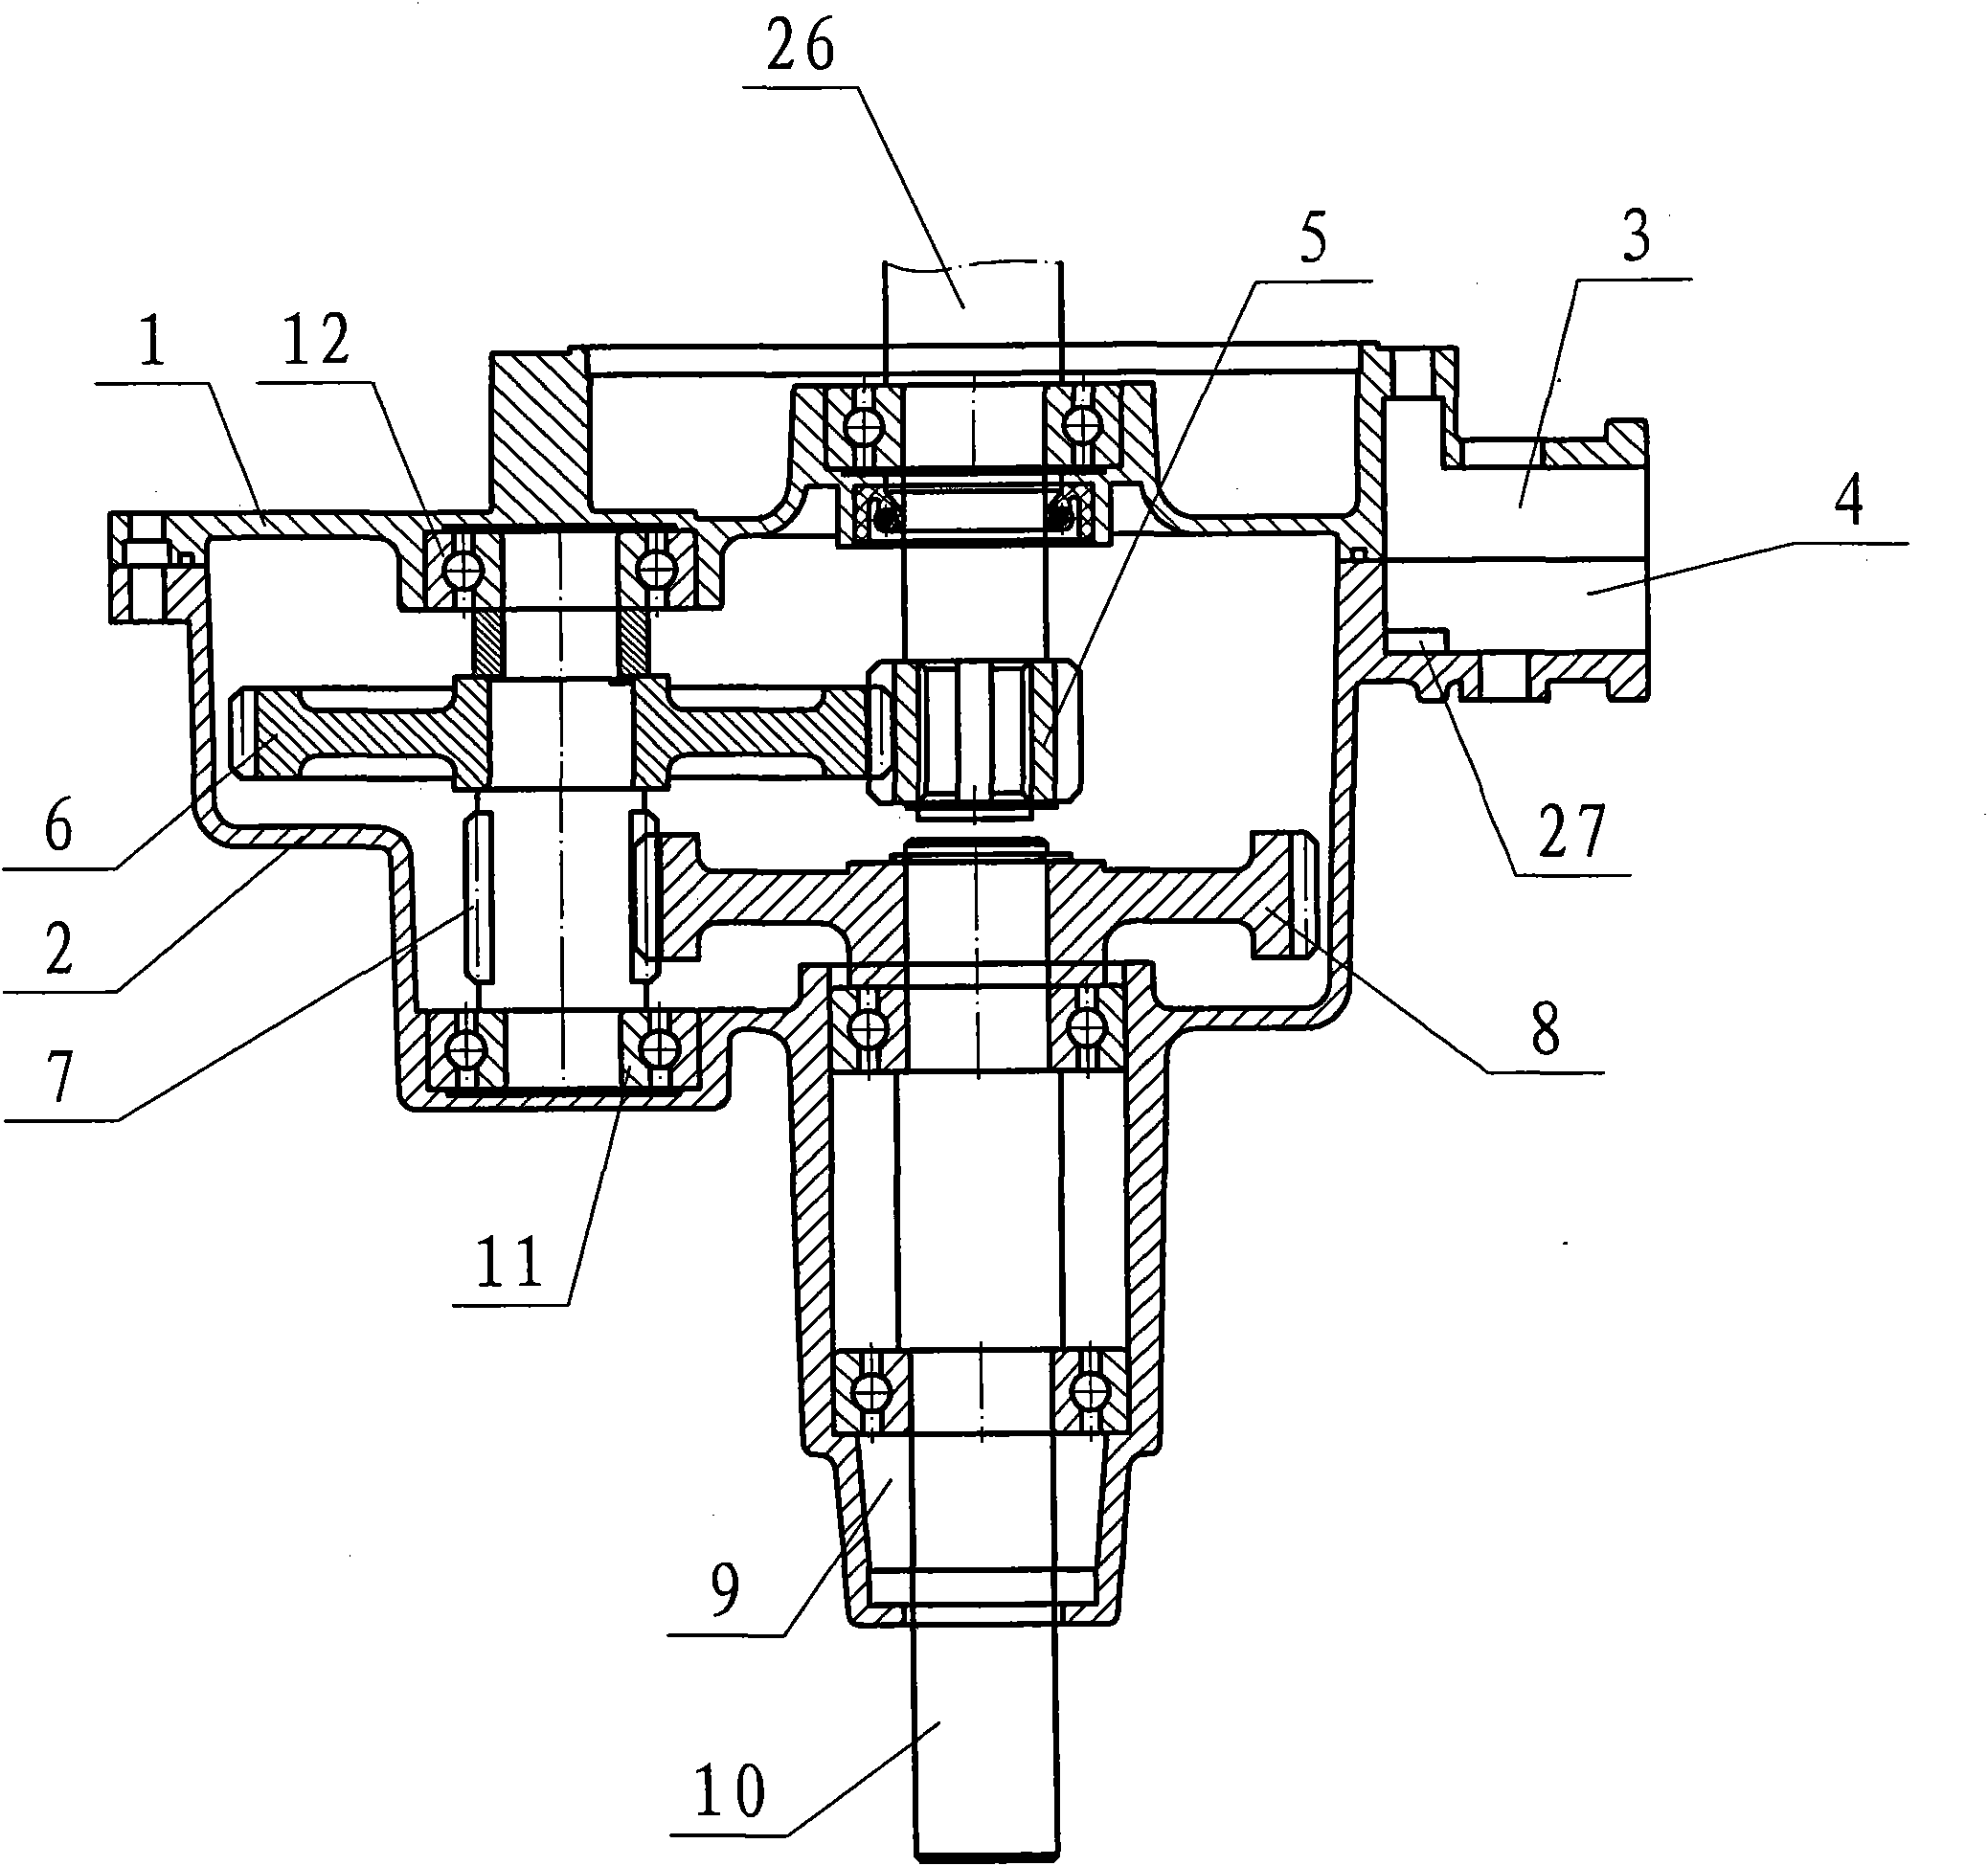 Reduction box of aerator and impeller type aerator provided with reduction box